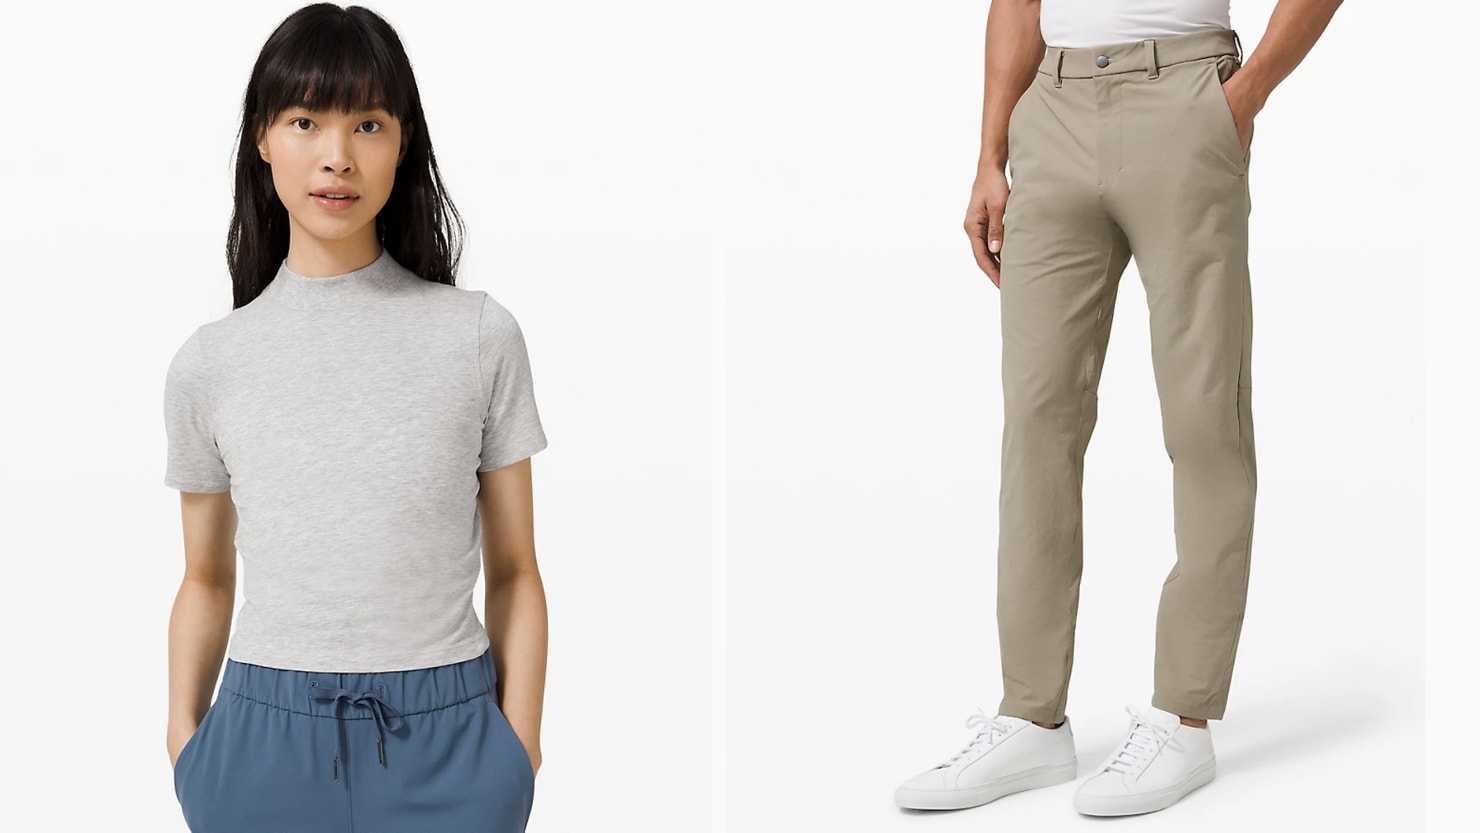 lululemon 'We Made Too Much' restock: There's a big markdown on